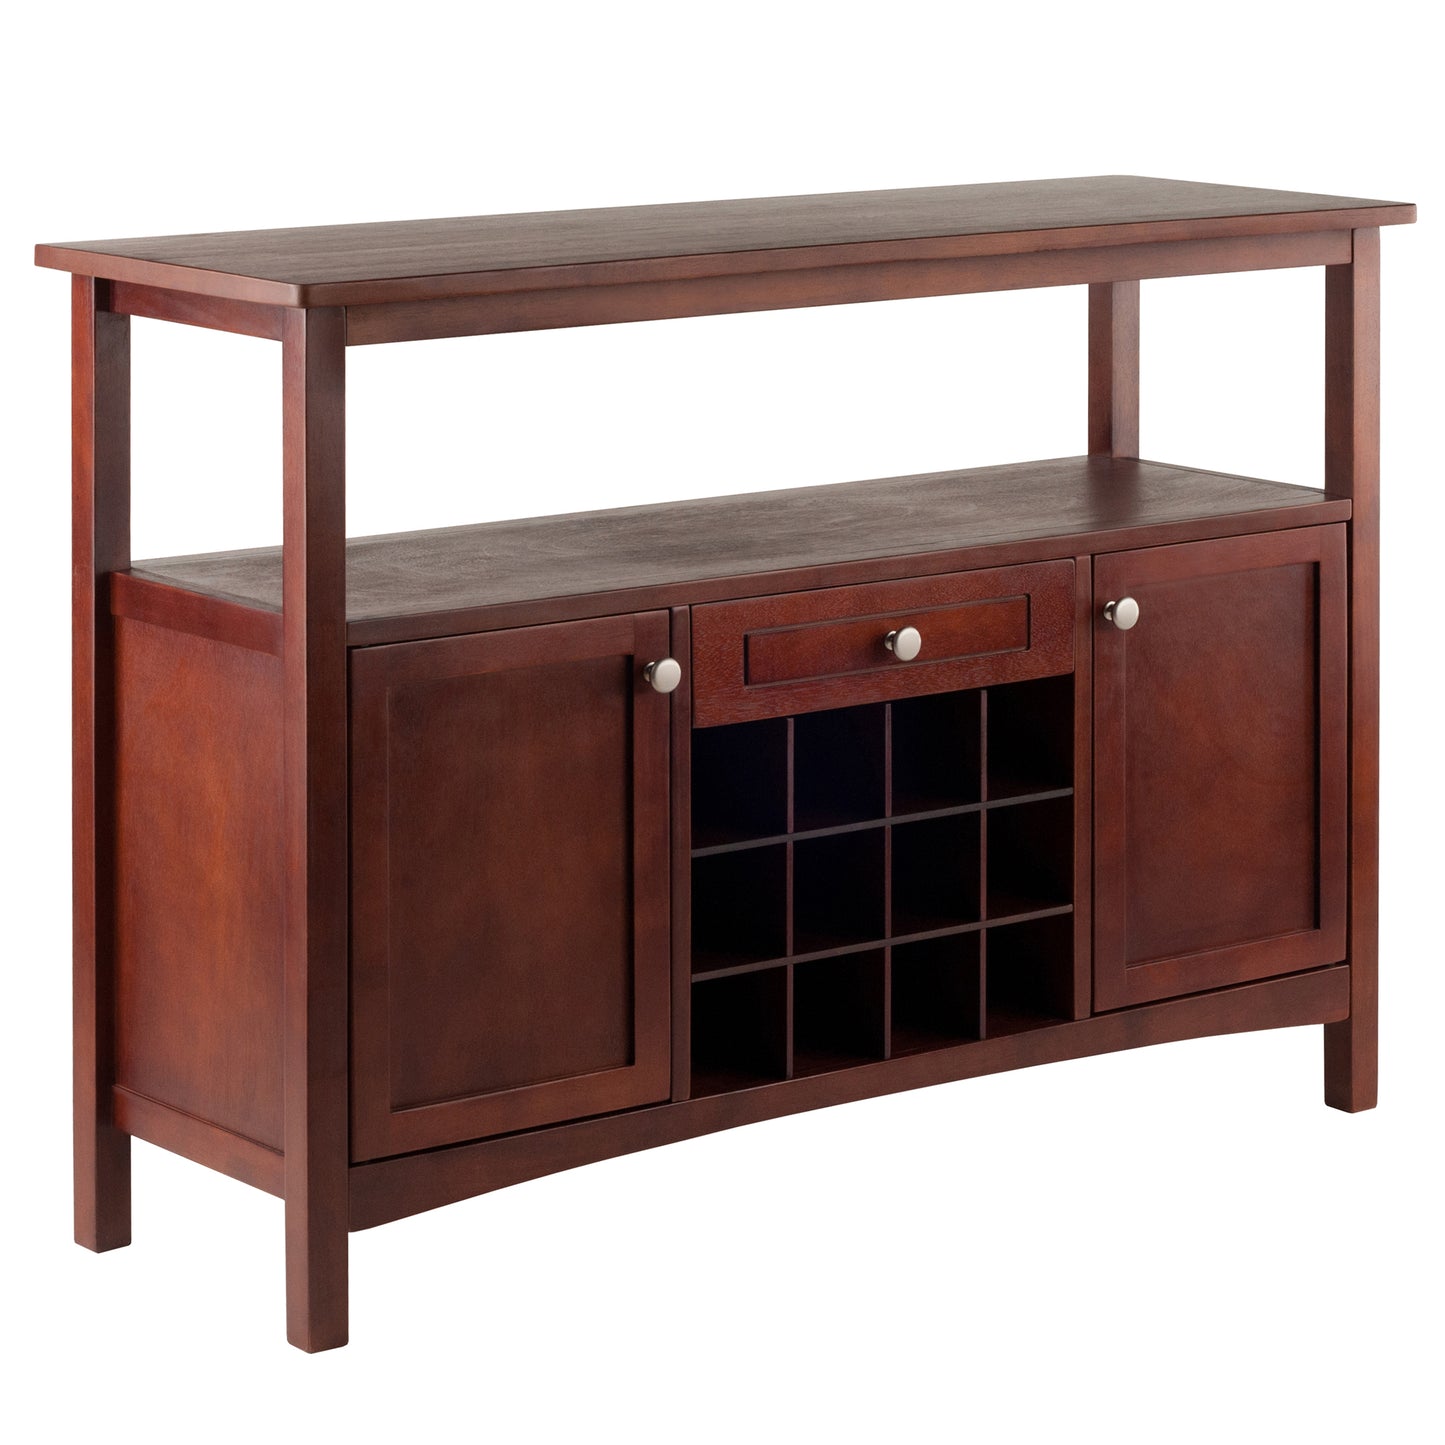 Winsome Colby Buffet Cabinet, Walnut